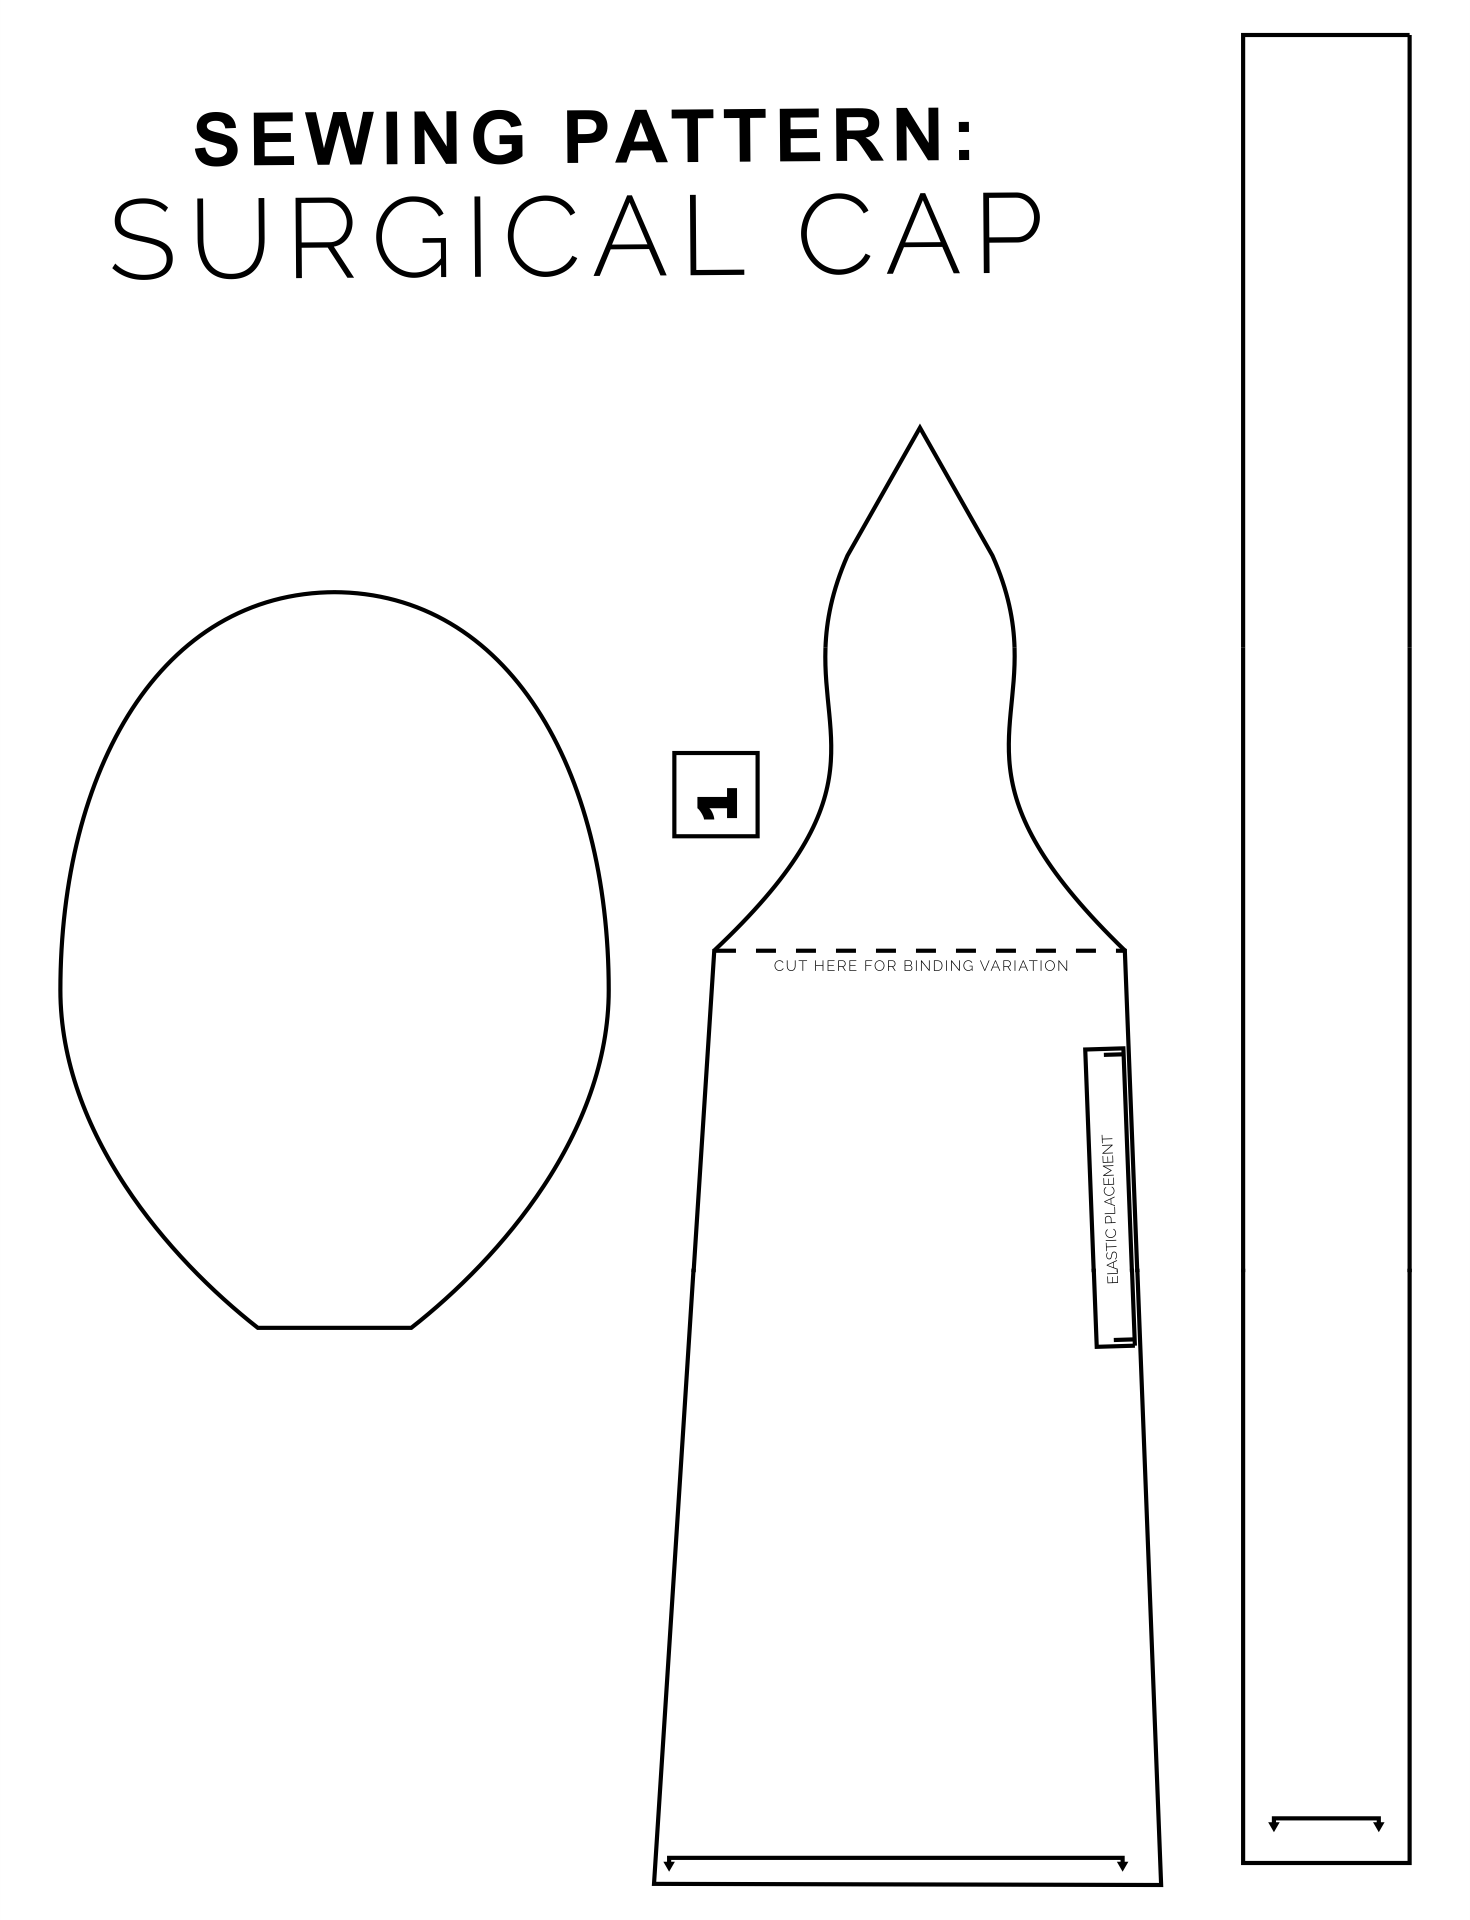 34 Surgical Cap Sewing Pattern Free MargauxArkady